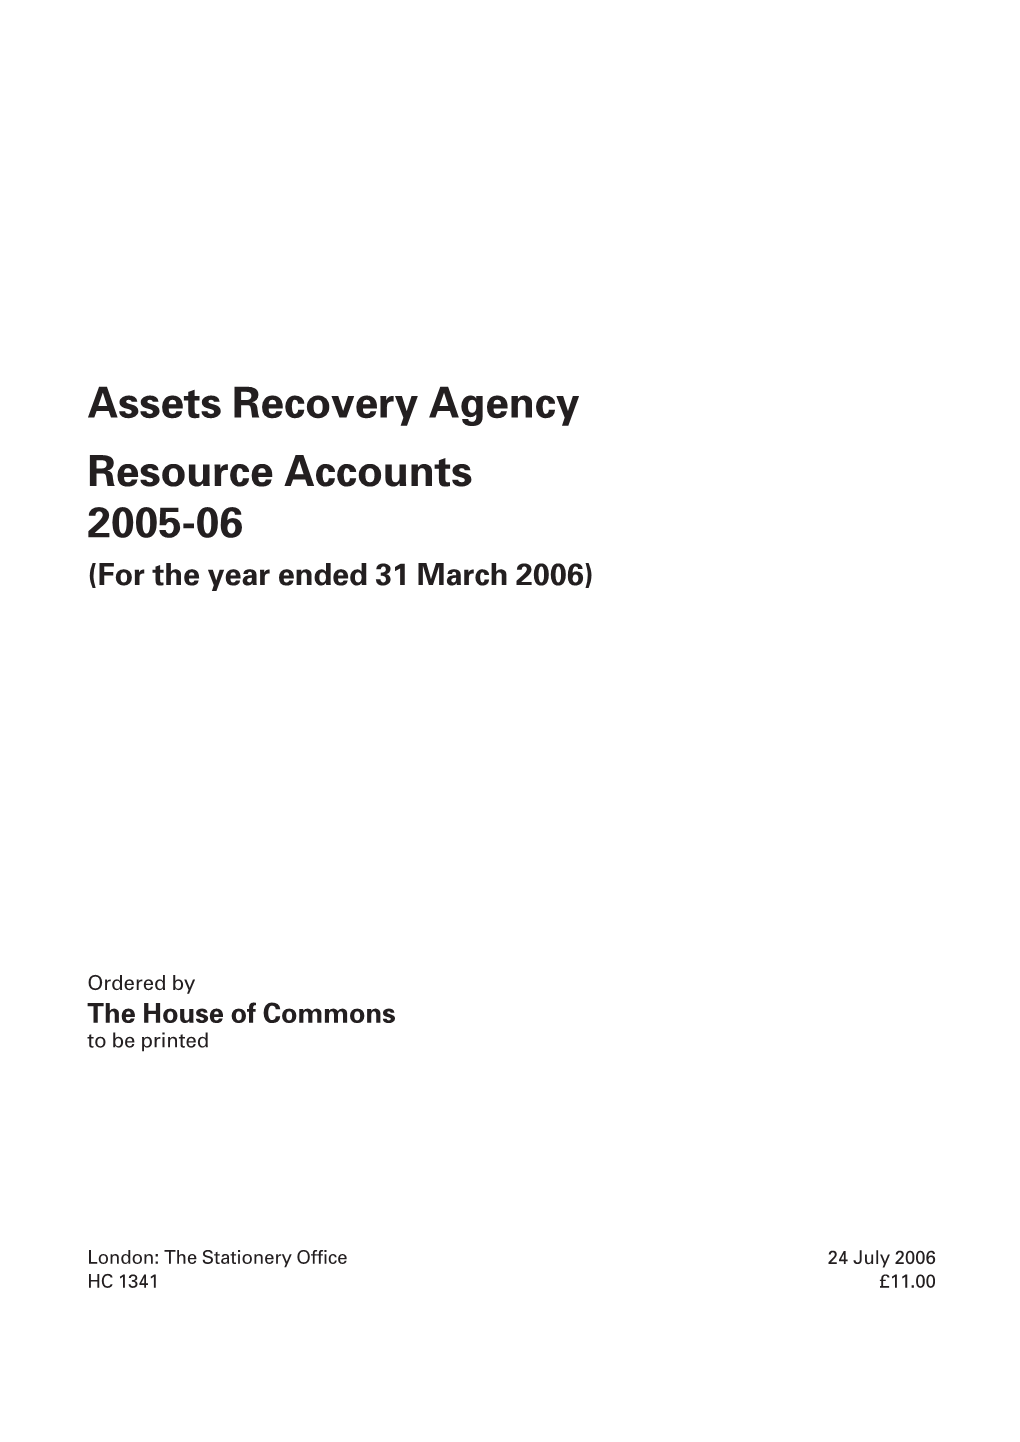 Assets Recovery Agency Resource Accounts 2005-06 (For the Year Ended 31 March 2006)